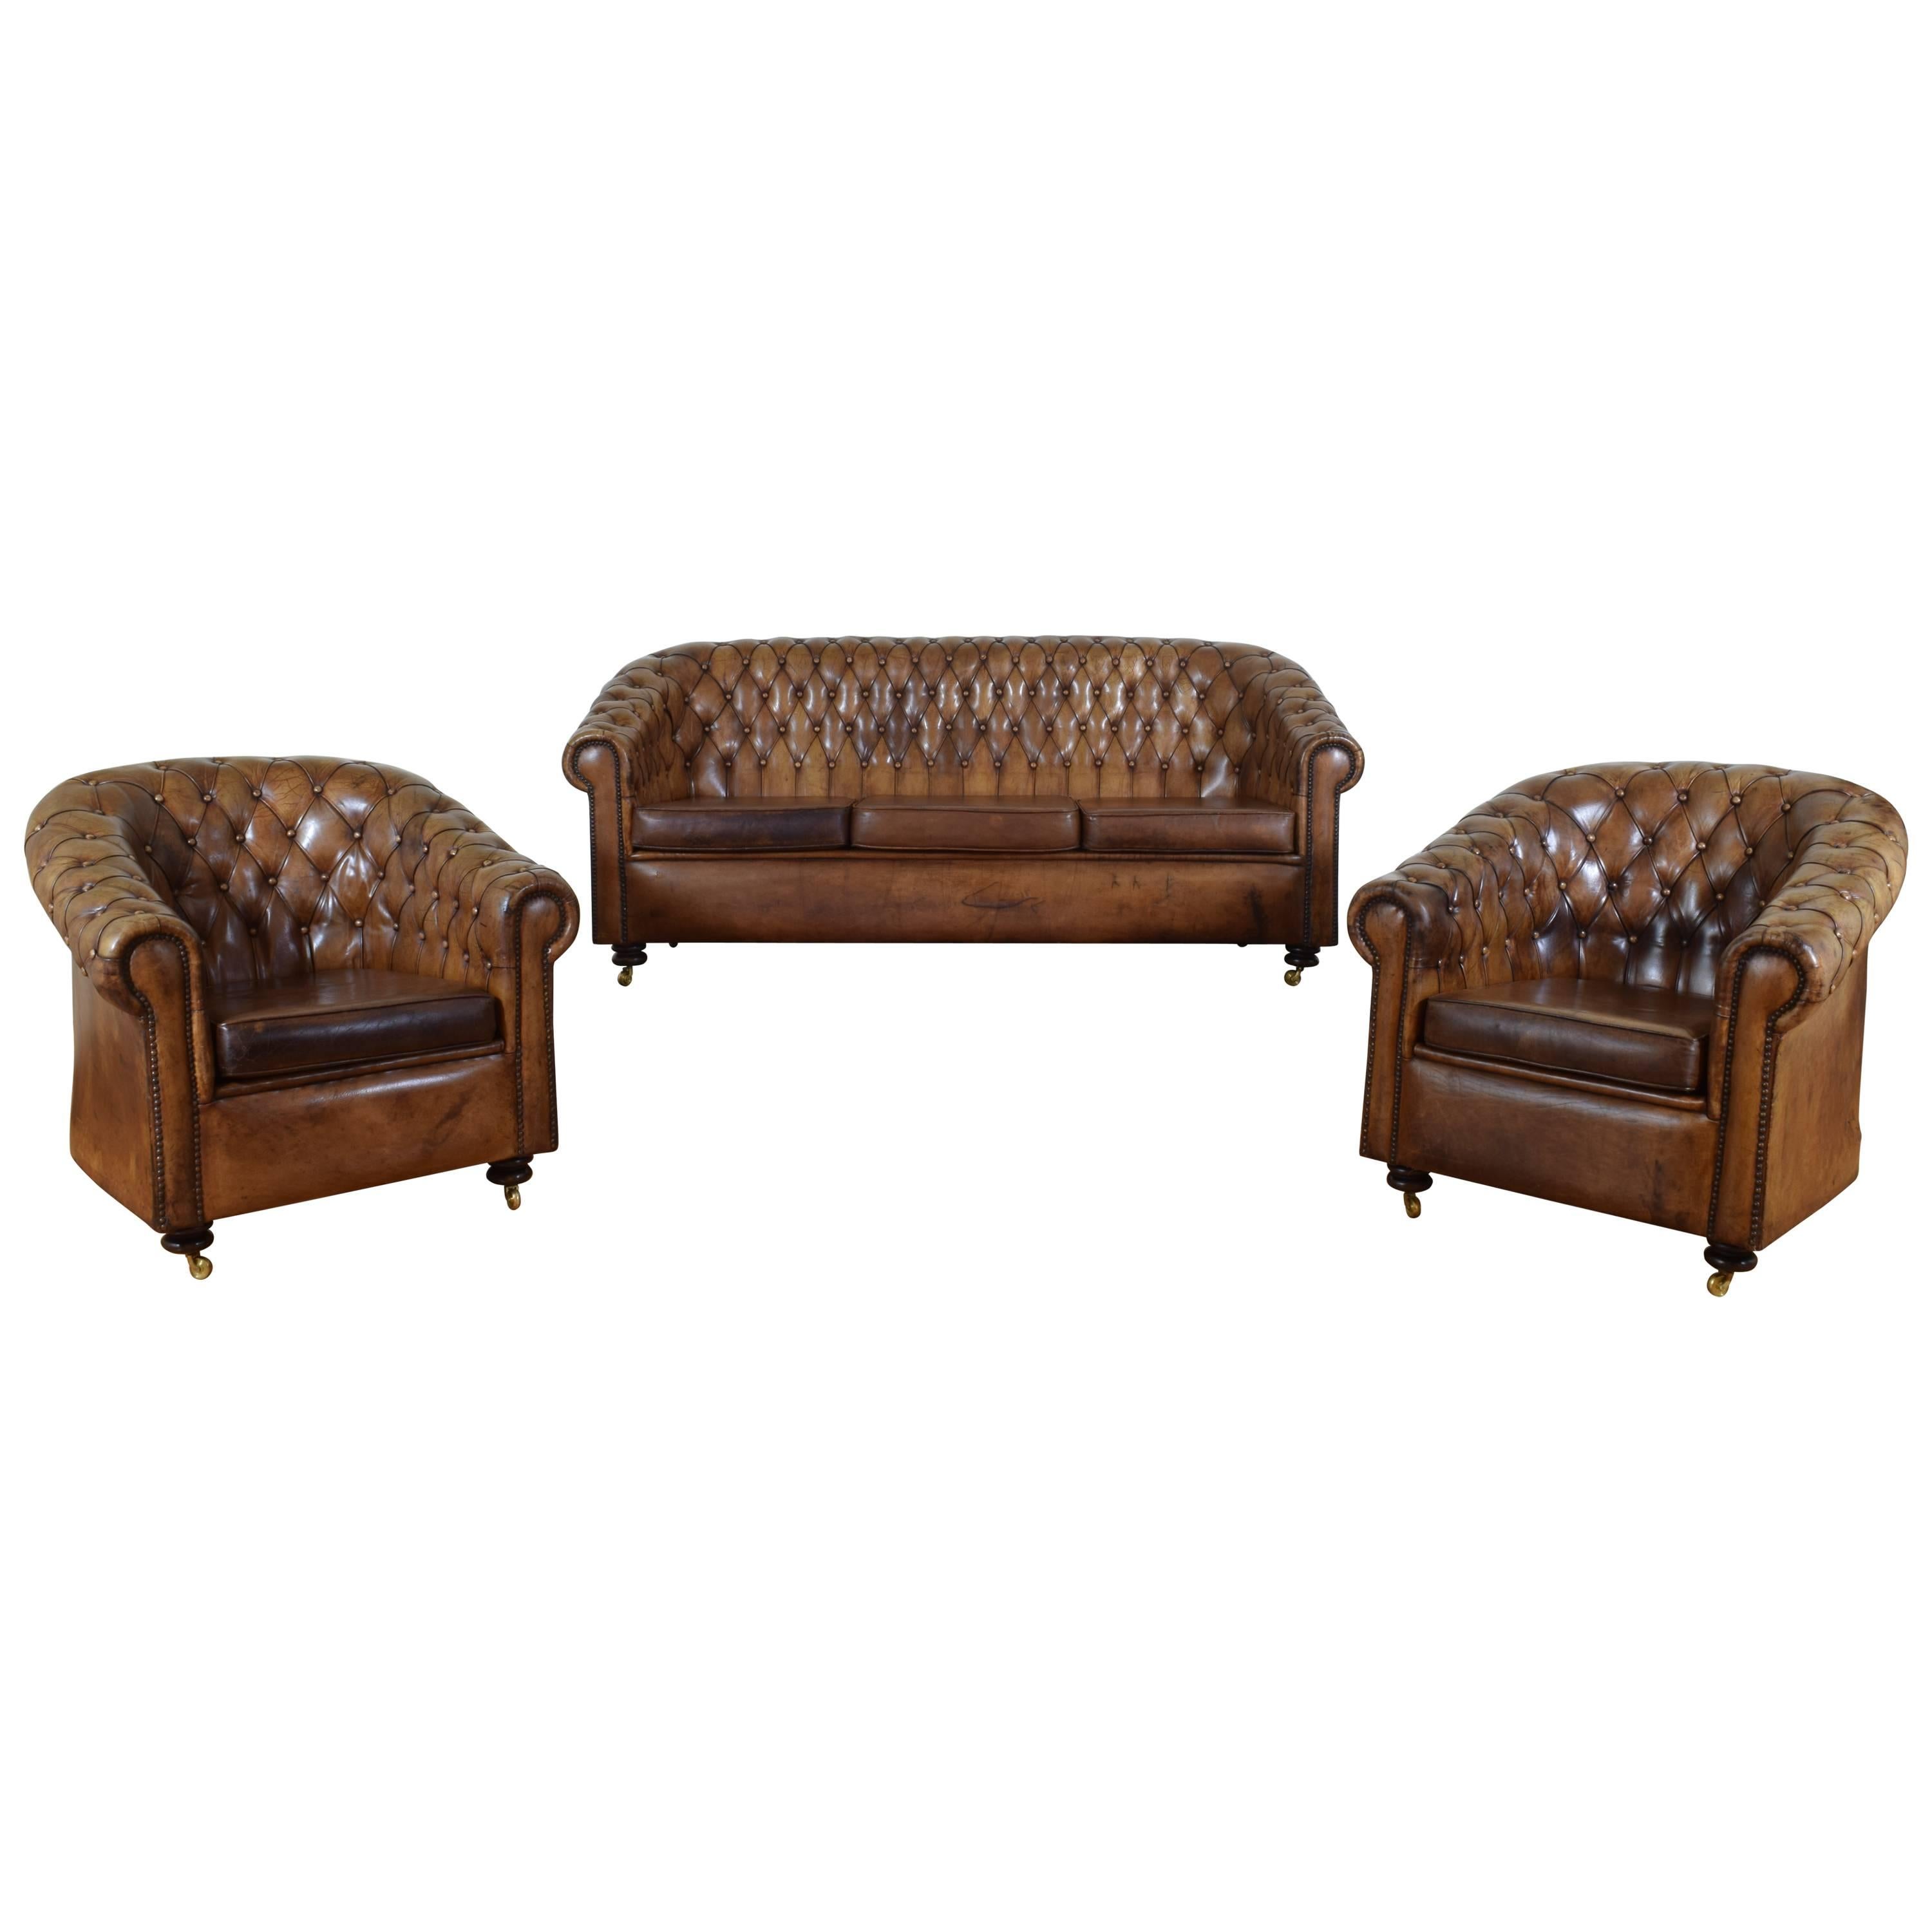 Set of Spanish Tufted Leather Chesterfield Style Seating Furniture, 20th Century